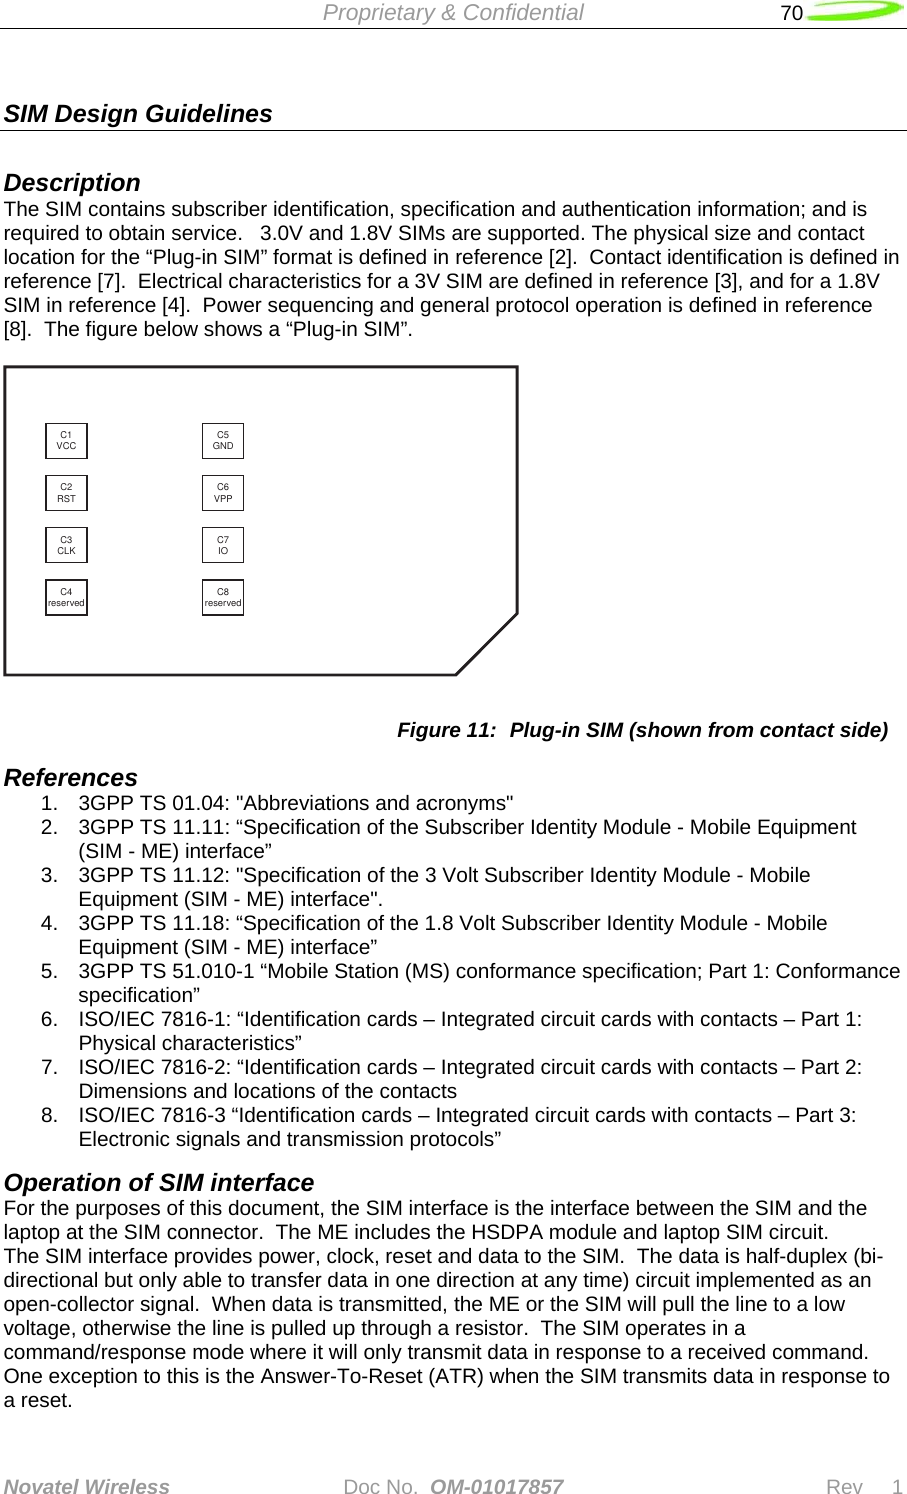  Proprietary &amp; Confidential   70   Novatel Wireless   Doc No.  OM-01017857                              Rev     1  SIM Design Guidelines  Description The SIM contains subscriber identification, specification and authentication information; and is required to obtain service.   3.0V and 1.8V SIMs are supported. The physical size and contact location for the “Plug-in SIM” format is defined in reference [2].  Contact identification is defined in reference [7].  Electrical characteristics for a 3V SIM are defined in reference [3], and for a 1.8V SIM in reference [4].  Power sequencing and general protocol operation is defined in reference [8].  The figure below shows a “Plug-in SIM”.  C1VCC C5GNDC2RST C6VPPC3CLK C7IOC4reserved C8reserved Figure 11:  Plug-in SIM (shown from contact side) References 1.  3GPP TS 01.04: &quot;Abbreviations and acronyms&quot; 2.  3GPP TS 11.11: “Specification of the Subscriber Identity Module - Mobile Equipment (SIM - ME) interface” 3.  3GPP TS 11.12: &quot;Specification of the 3 Volt Subscriber Identity Module - Mobile Equipment (SIM - ME) interface&quot;. 4.  3GPP TS 11.18: “Specification of the 1.8 Volt Subscriber Identity Module - Mobile Equipment (SIM - ME) interface” 5.  3GPP TS 51.010-1 “Mobile Station (MS) conformance specification; Part 1: Conformance specification” 6.  ISO/IEC 7816-1: “Identification cards – Integrated circuit cards with contacts – Part 1: Physical characteristics” 7.  ISO/IEC 7816-2: “Identification cards – Integrated circuit cards with contacts – Part 2: Dimensions and locations of the contacts 8.  ISO/IEC 7816-3 “Identification cards – Integrated circuit cards with contacts – Part 3: Electronic signals and transmission protocols” Operation of SIM interface For the purposes of this document, the SIM interface is the interface between the SIM and the laptop at the SIM connector.  The ME includes the HSDPA module and laptop SIM circuit. The SIM interface provides power, clock, reset and data to the SIM.  The data is half-duplex (bi-directional but only able to transfer data in one direction at any time) circuit implemented as an open-collector signal.  When data is transmitted, the ME or the SIM will pull the line to a low voltage, otherwise the line is pulled up through a resistor.  The SIM operates in a command/response mode where it will only transmit data in response to a received command.  One exception to this is the Answer-To-Reset (ATR) when the SIM transmits data in response to a reset. 